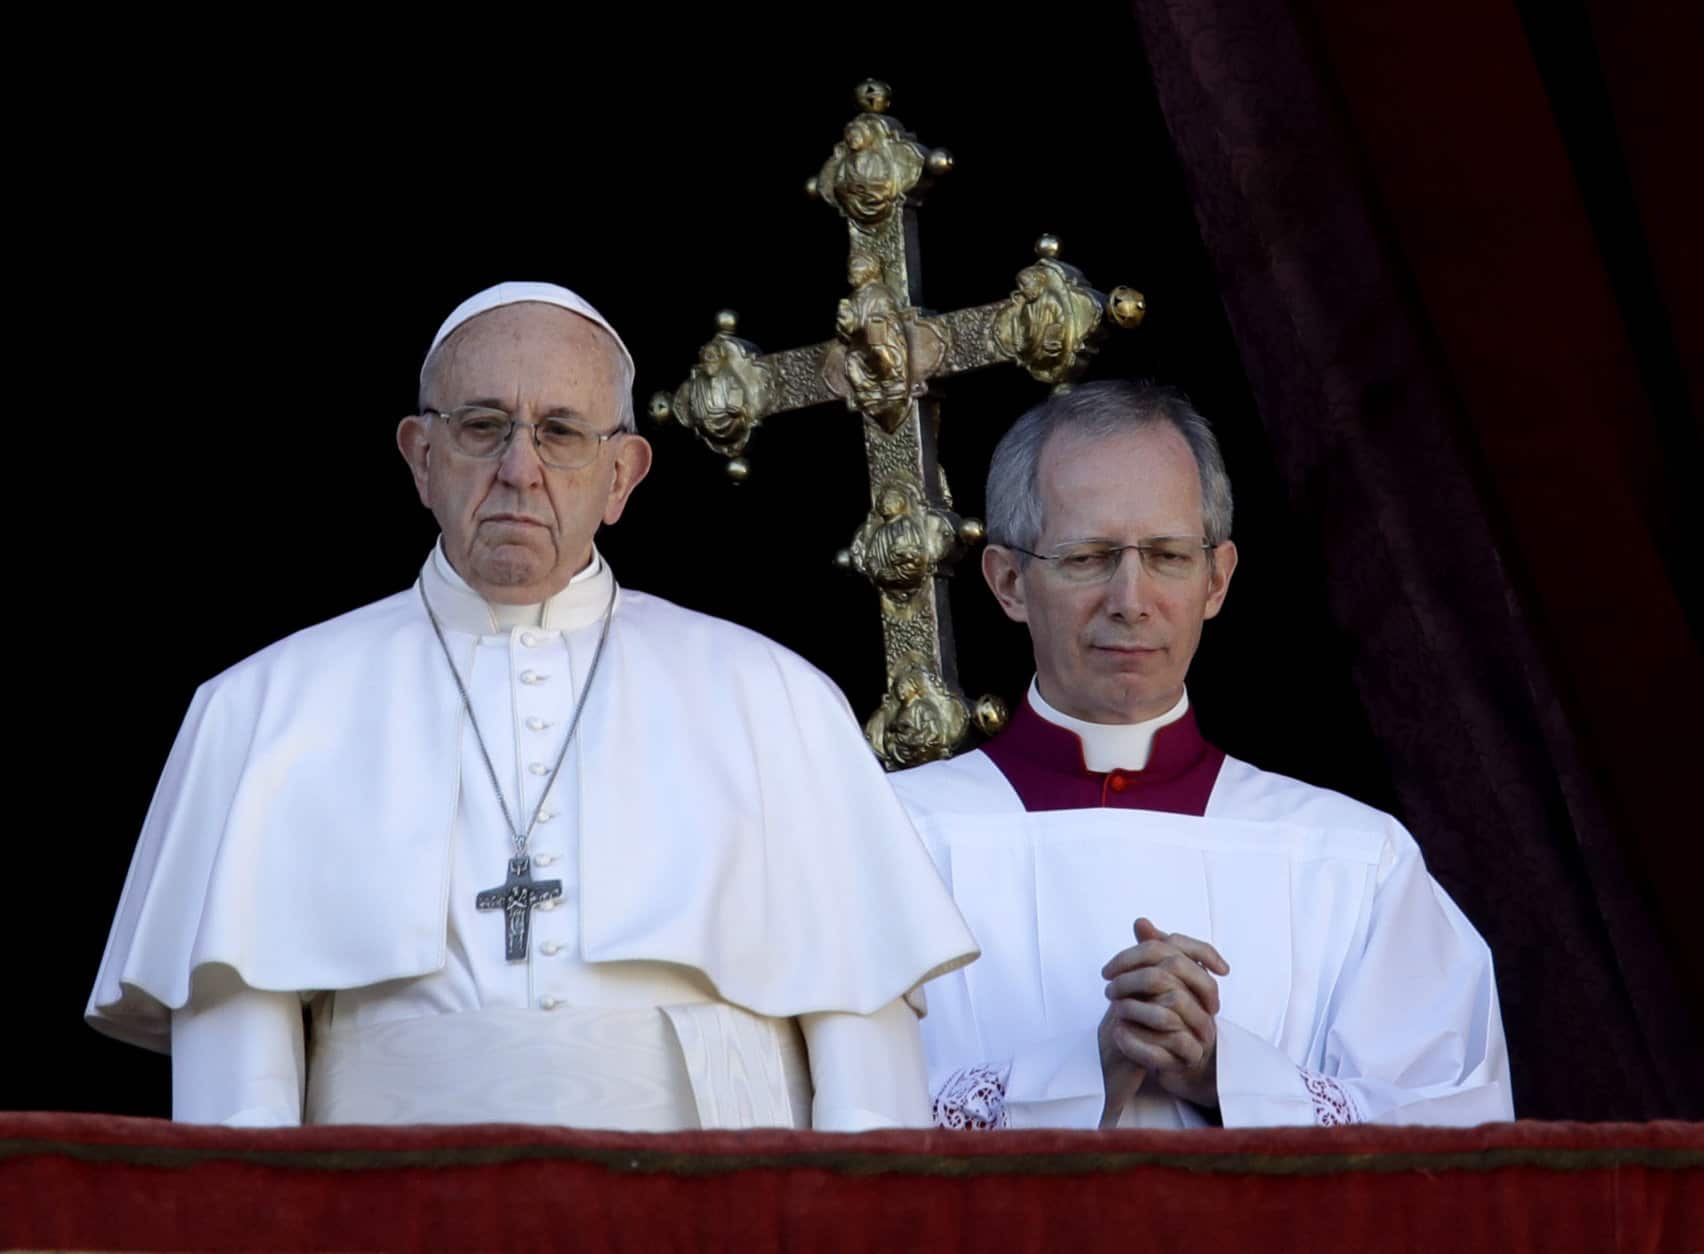 Pope Francis, flanked by Master of Ceremonies Bishop Guido Marini, looks at St. Peter's Square after the Urbi et Orbi (Latin for 'to the city and to the world' ) Christmas' day blessing from the main balcony of St. Peter's Basilica at the Vatican, Tuesday, Dec. 25, 2018. (AP Photo/Alessandra Tarantino)